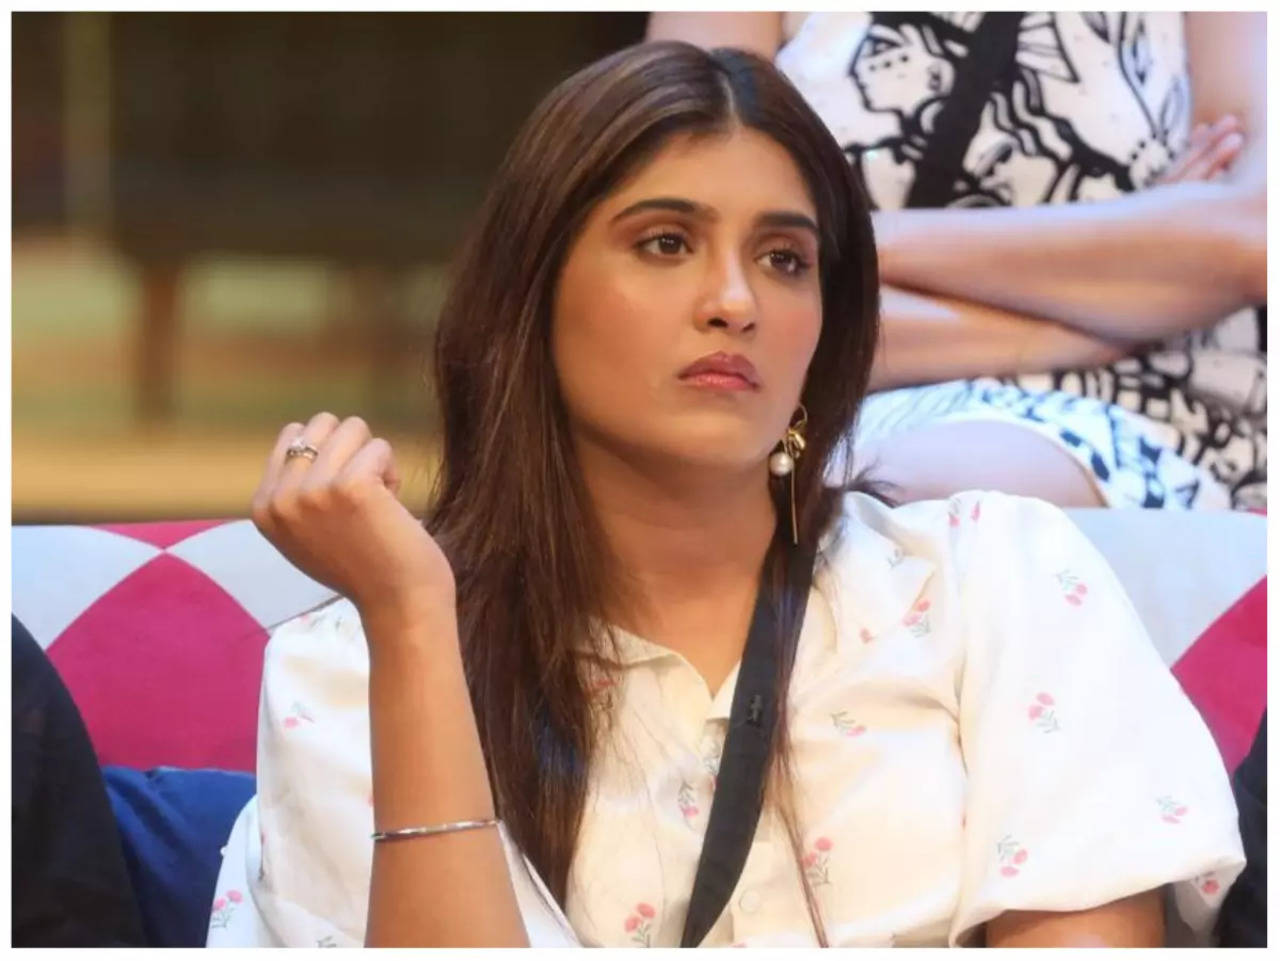 BiggBoss16! Nimrit Kaur Ahluwalia Its disappointing that contestants like Shalin Bhanot and Archana Gautam are still in the house while I have been evicted